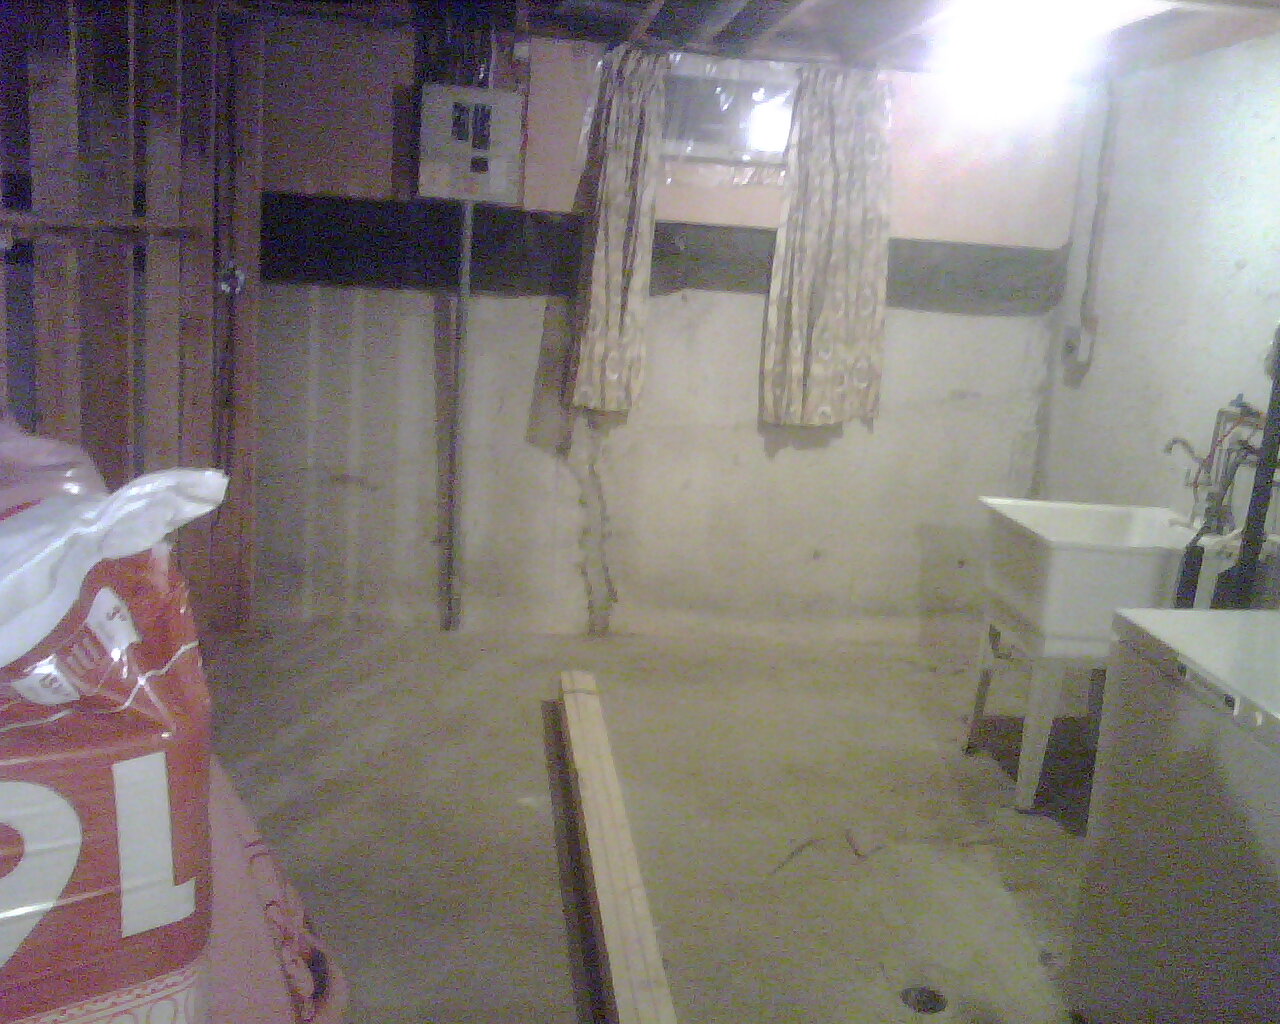 Basement's washer and dryer area with all the gas and electric stuff (this area will be tiled lamenated when the basement room is built)